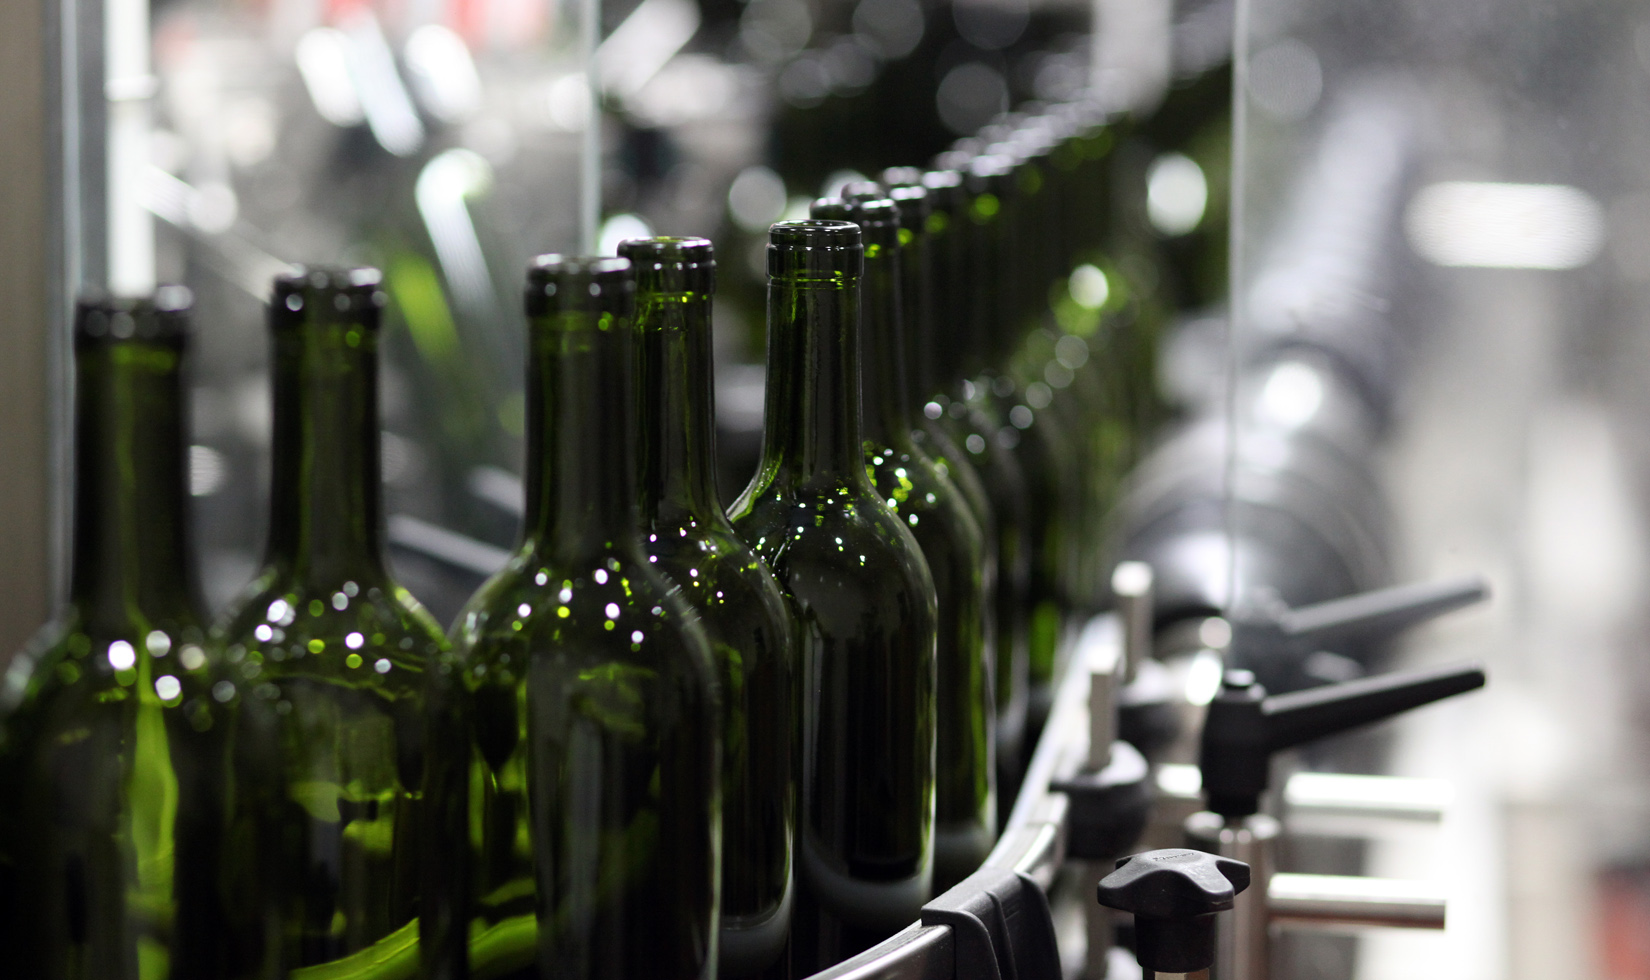 Close-up of unlabeled green wine bottles on a silver and clear conveyor belt.